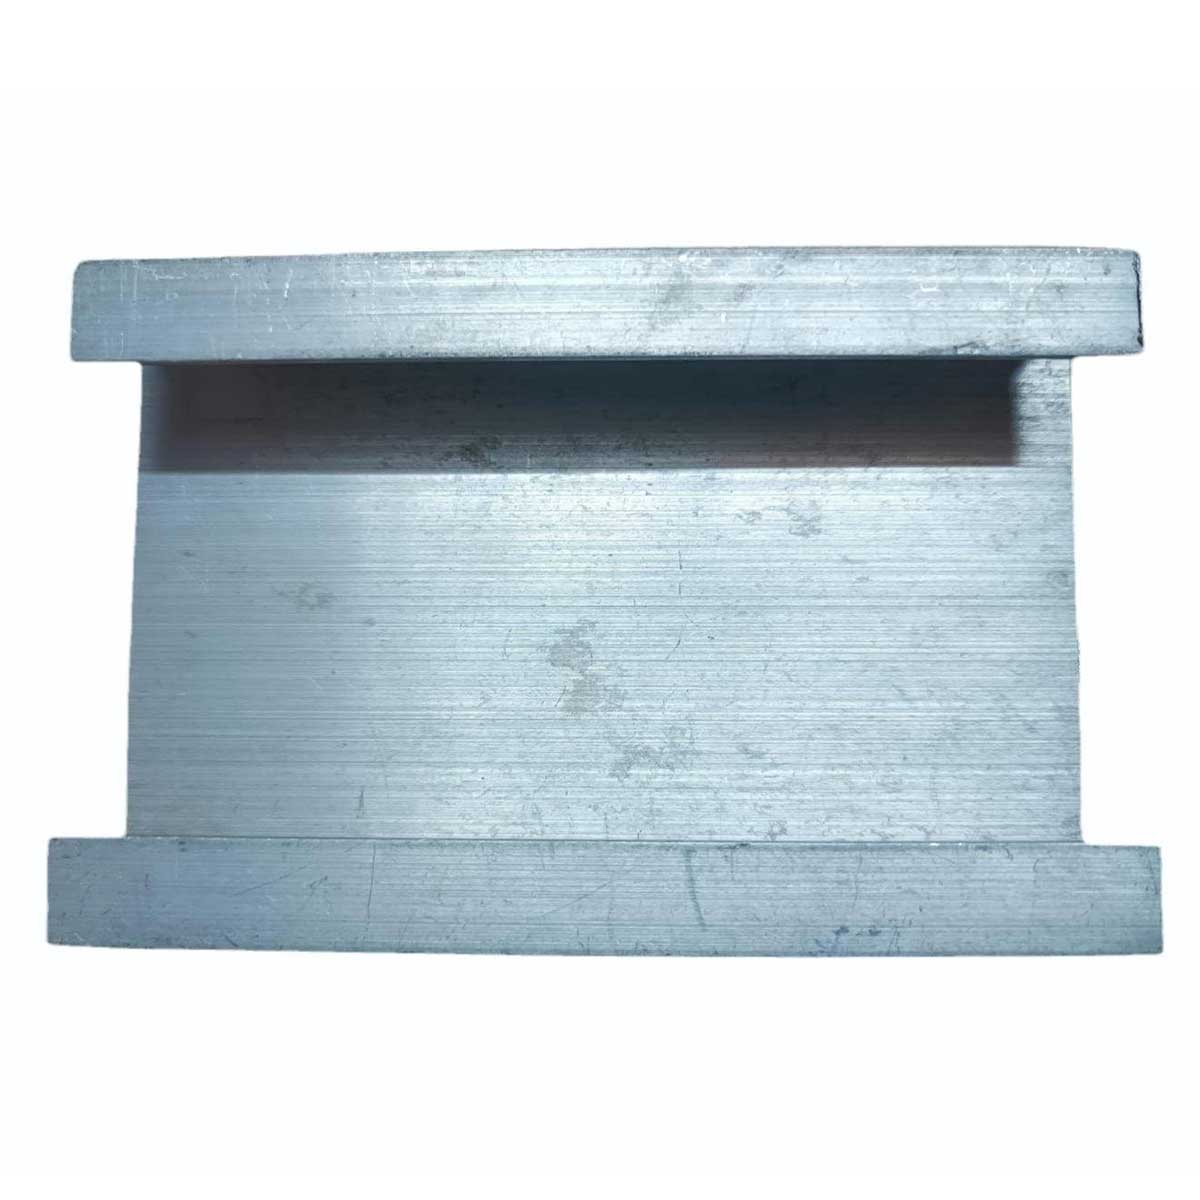 Elevation Aluminium C Channel Manufacturers, Suppliers in Nagda